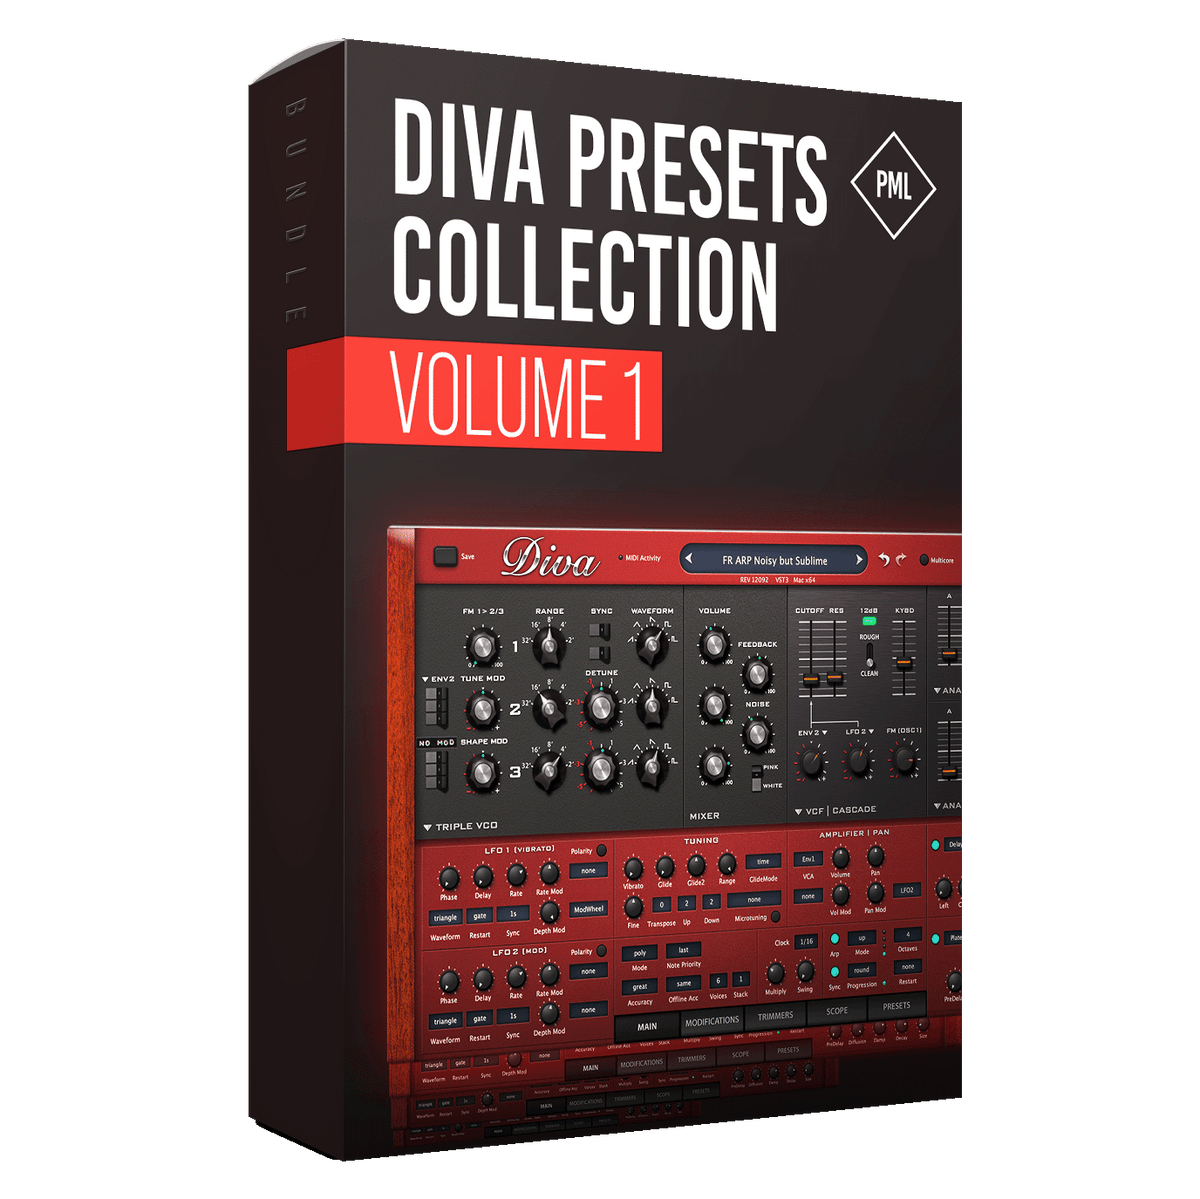 Diva Presets Collection Vol.1 Product Box